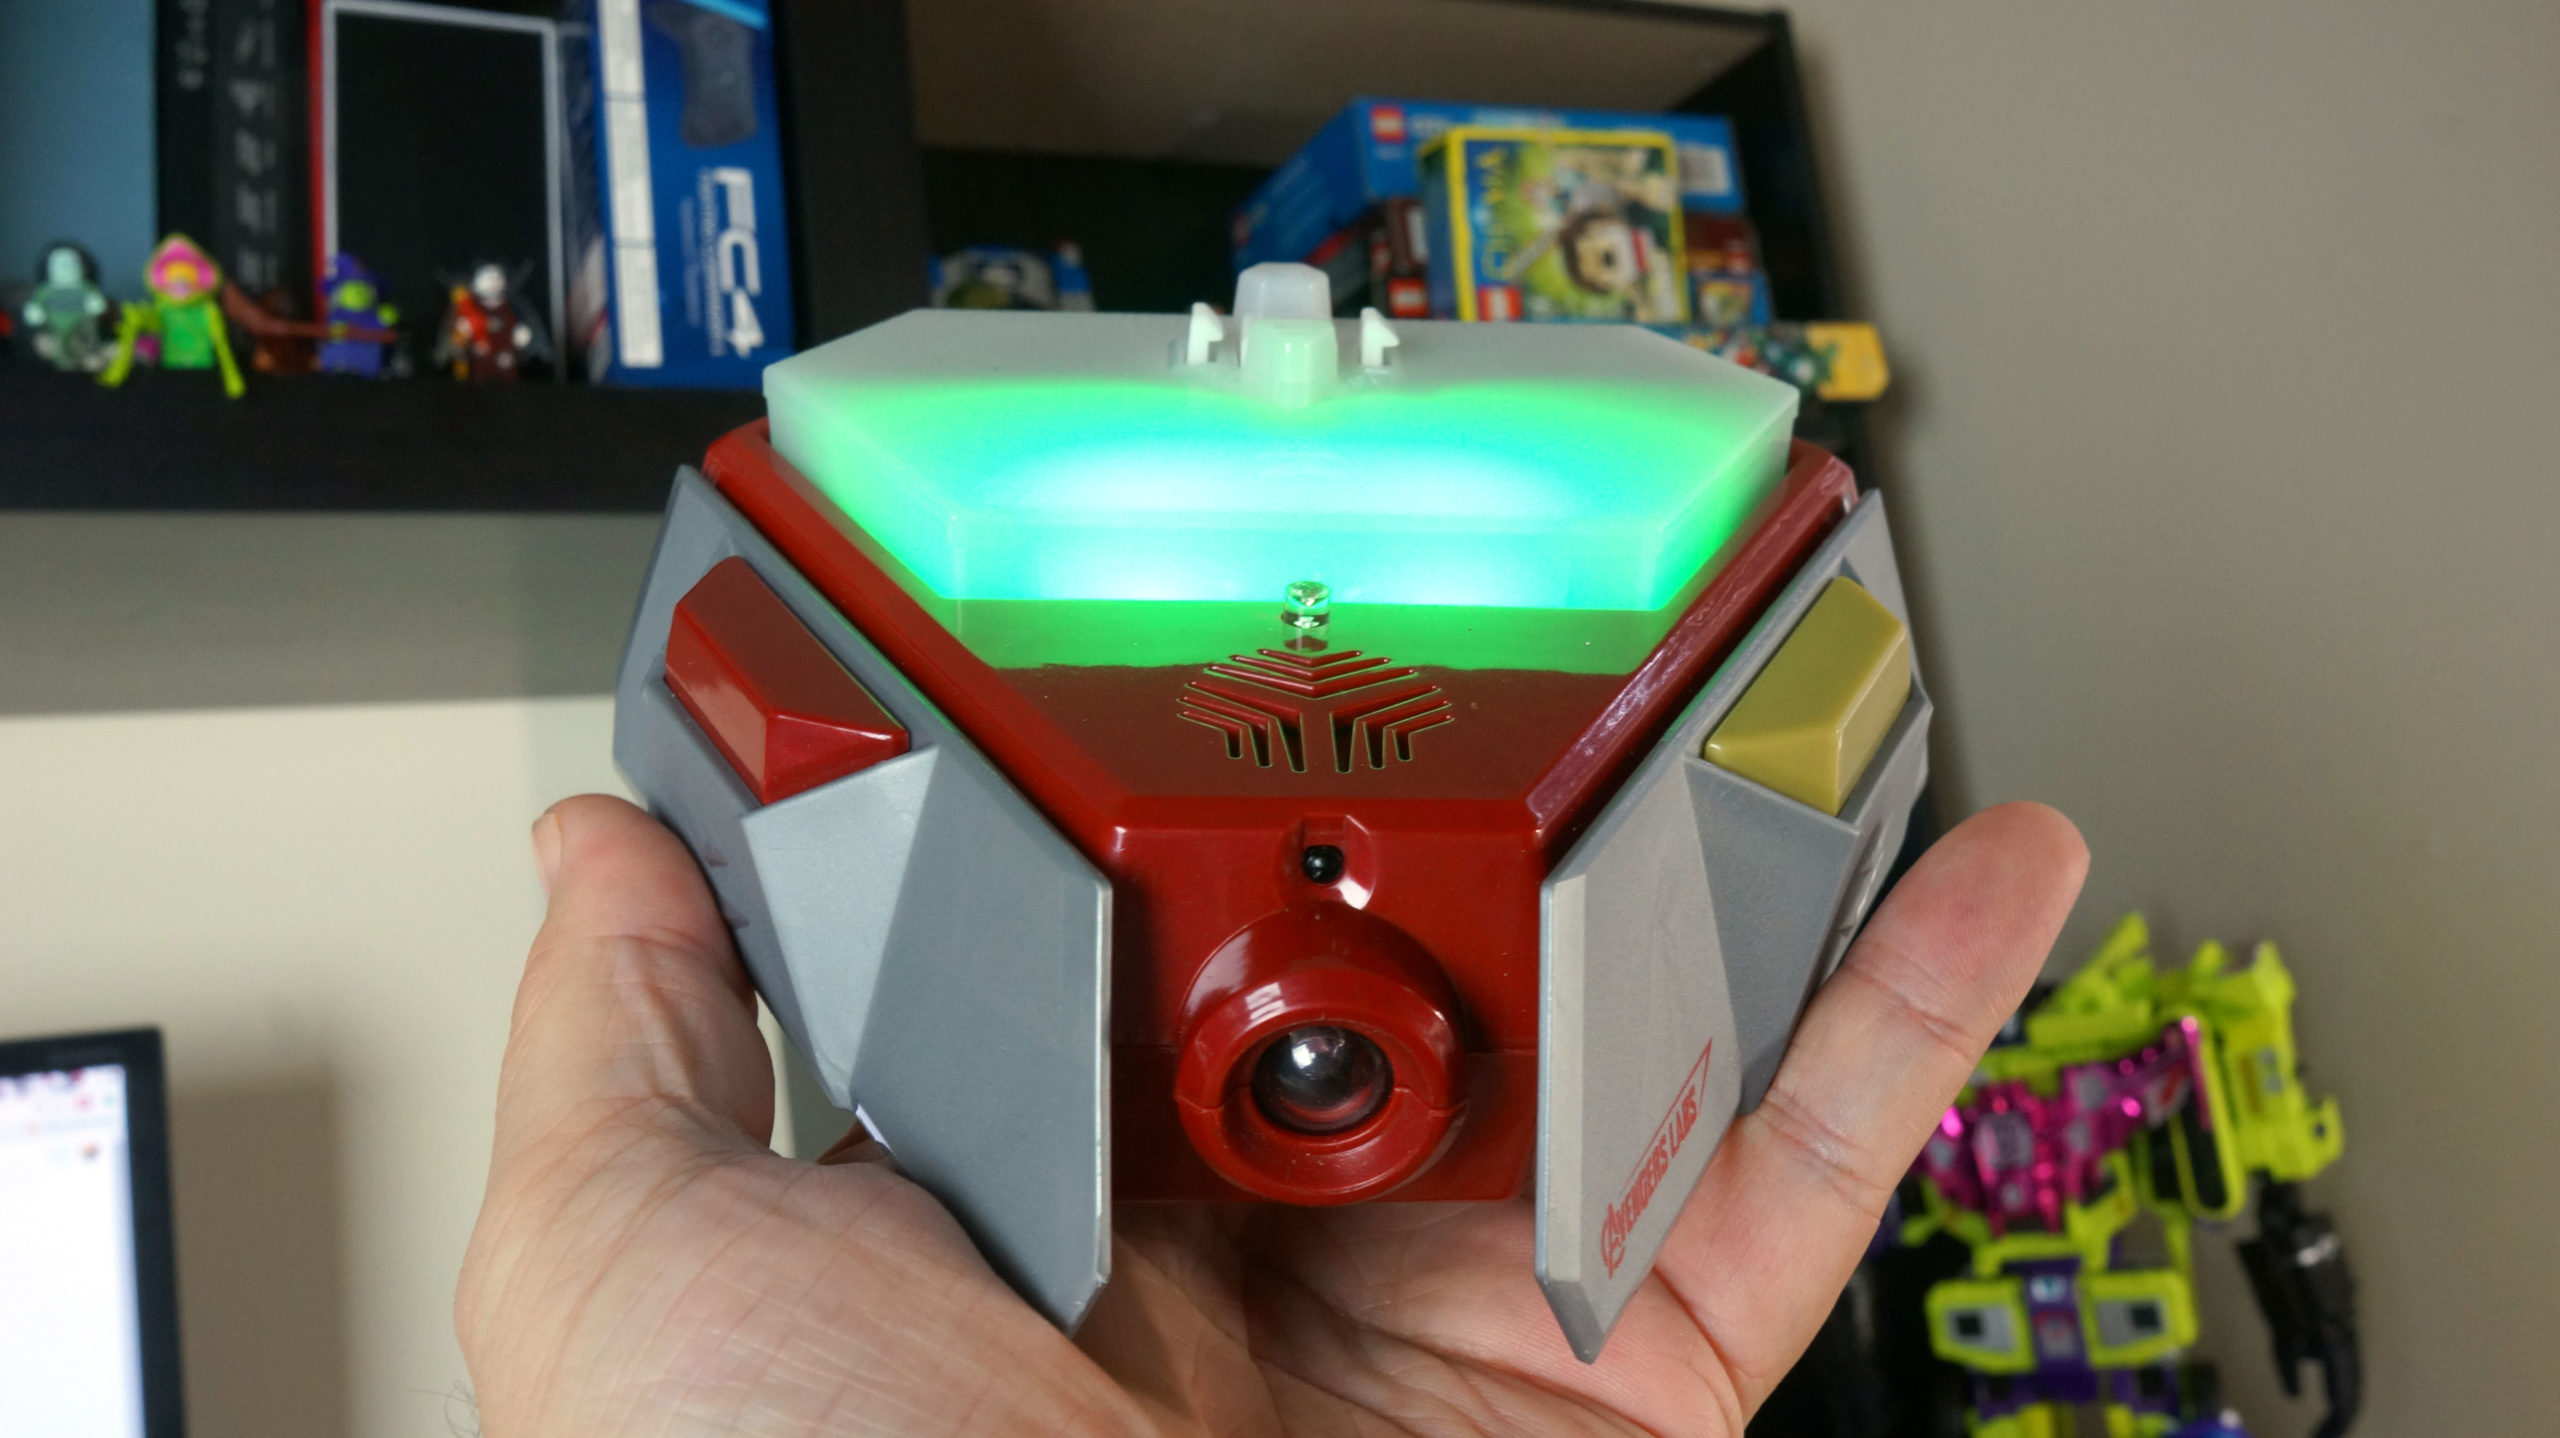 Having Way Too Much Fun With Disney PlayMation